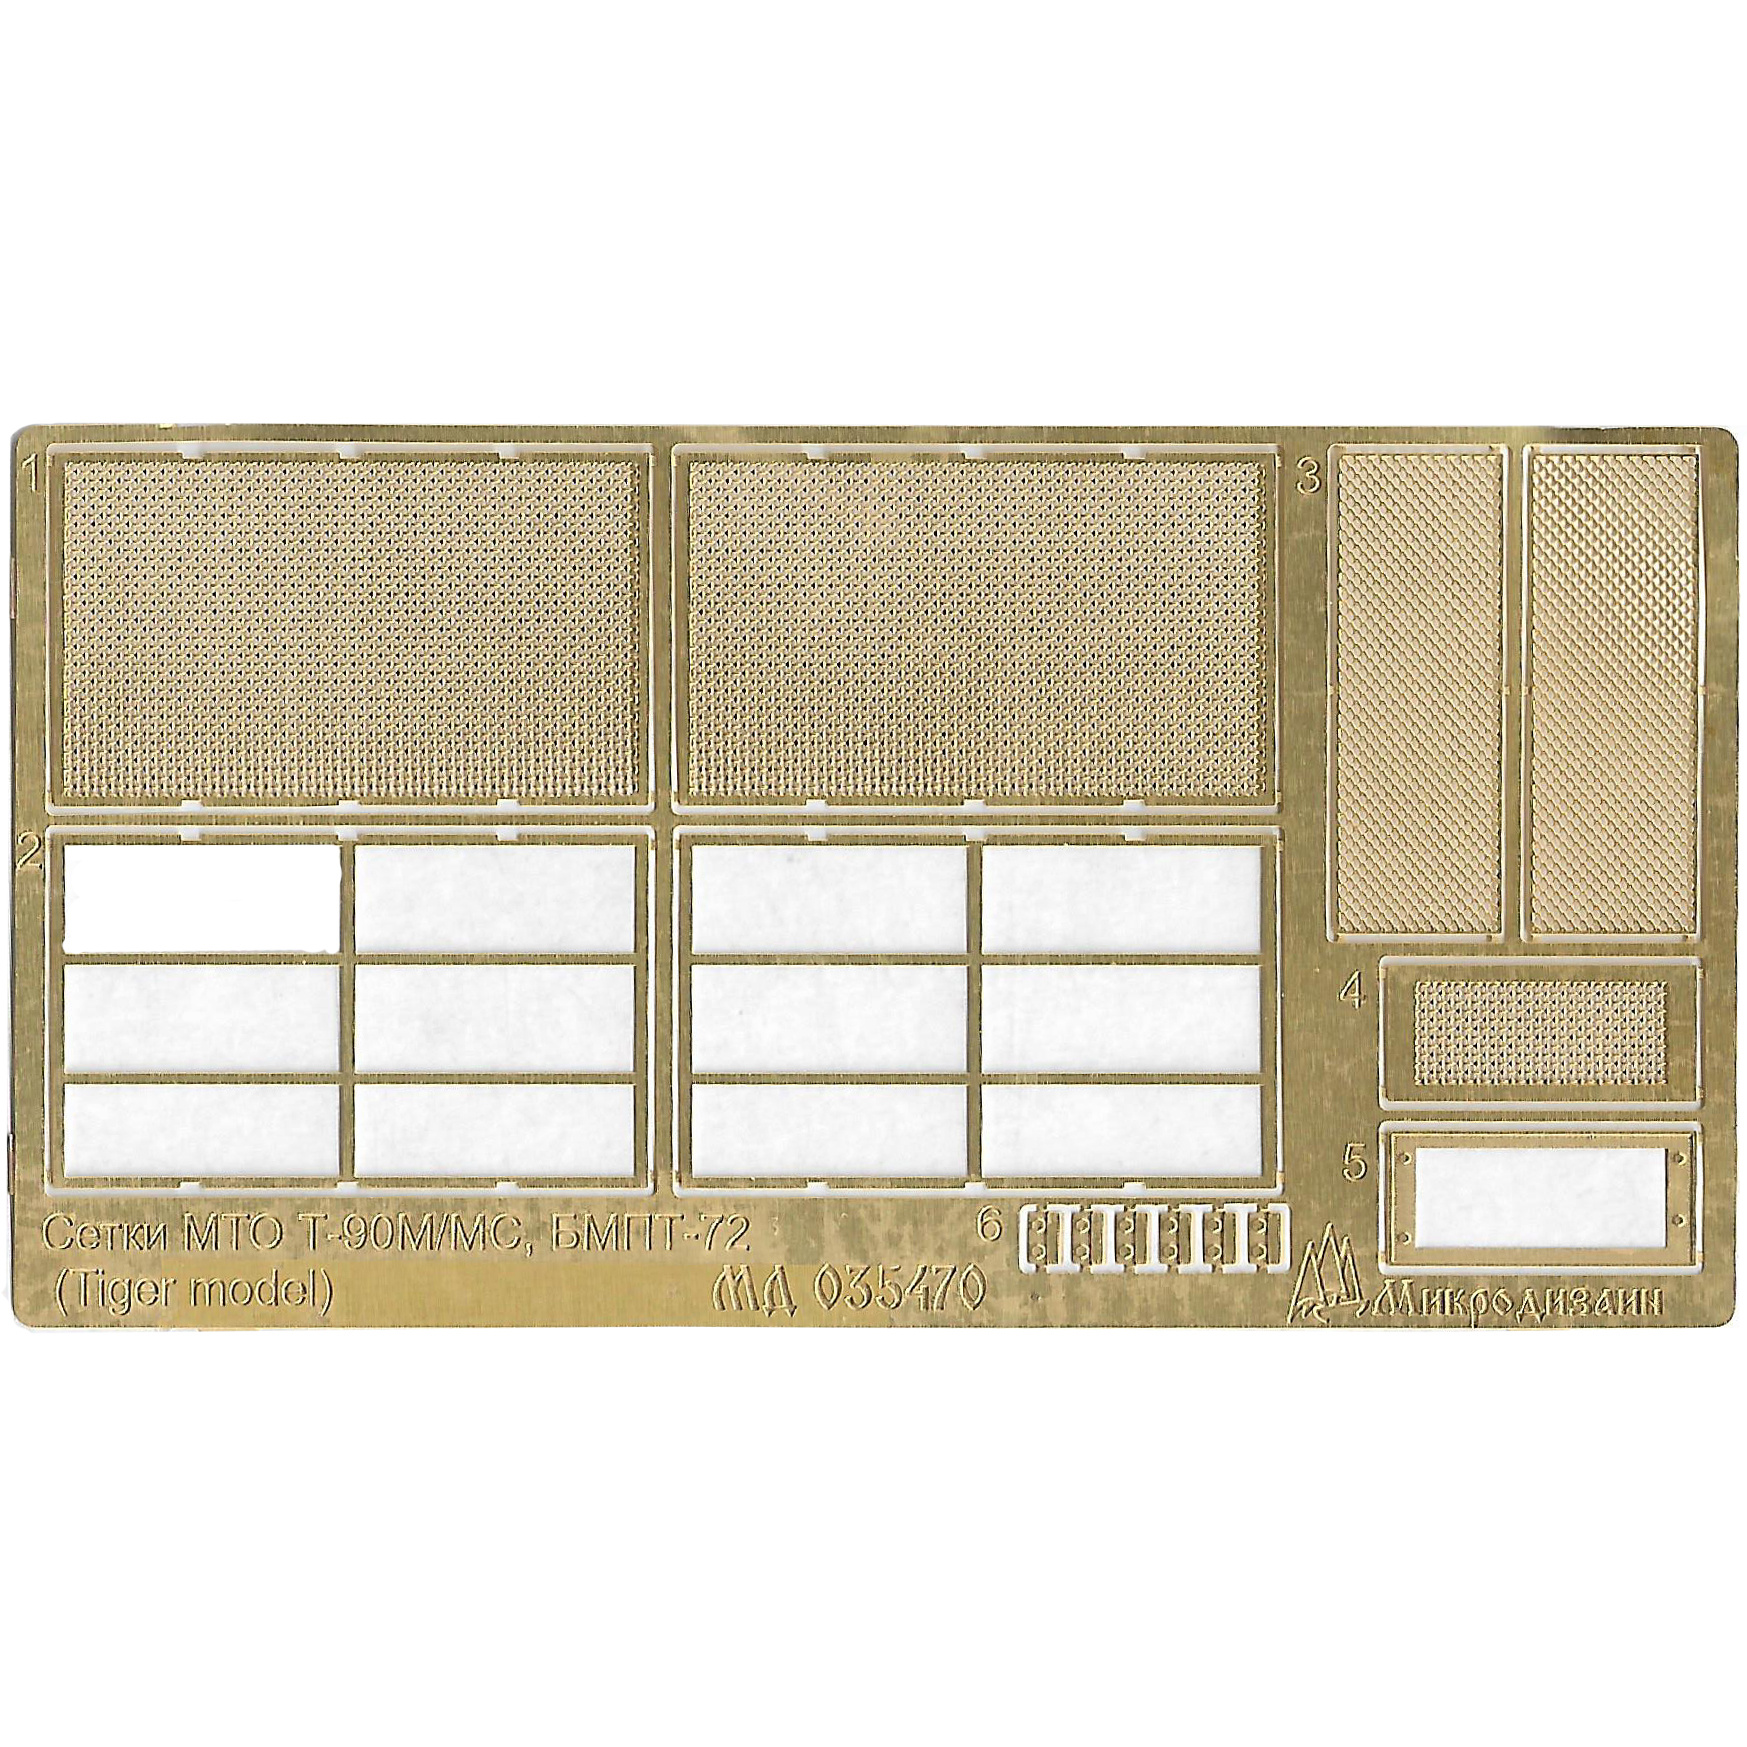 035470 Micro Design 1/35 Set of photo etching of MTO grids for the ninetieth tank, 72 Tank support combat vehicle (Tiger model)